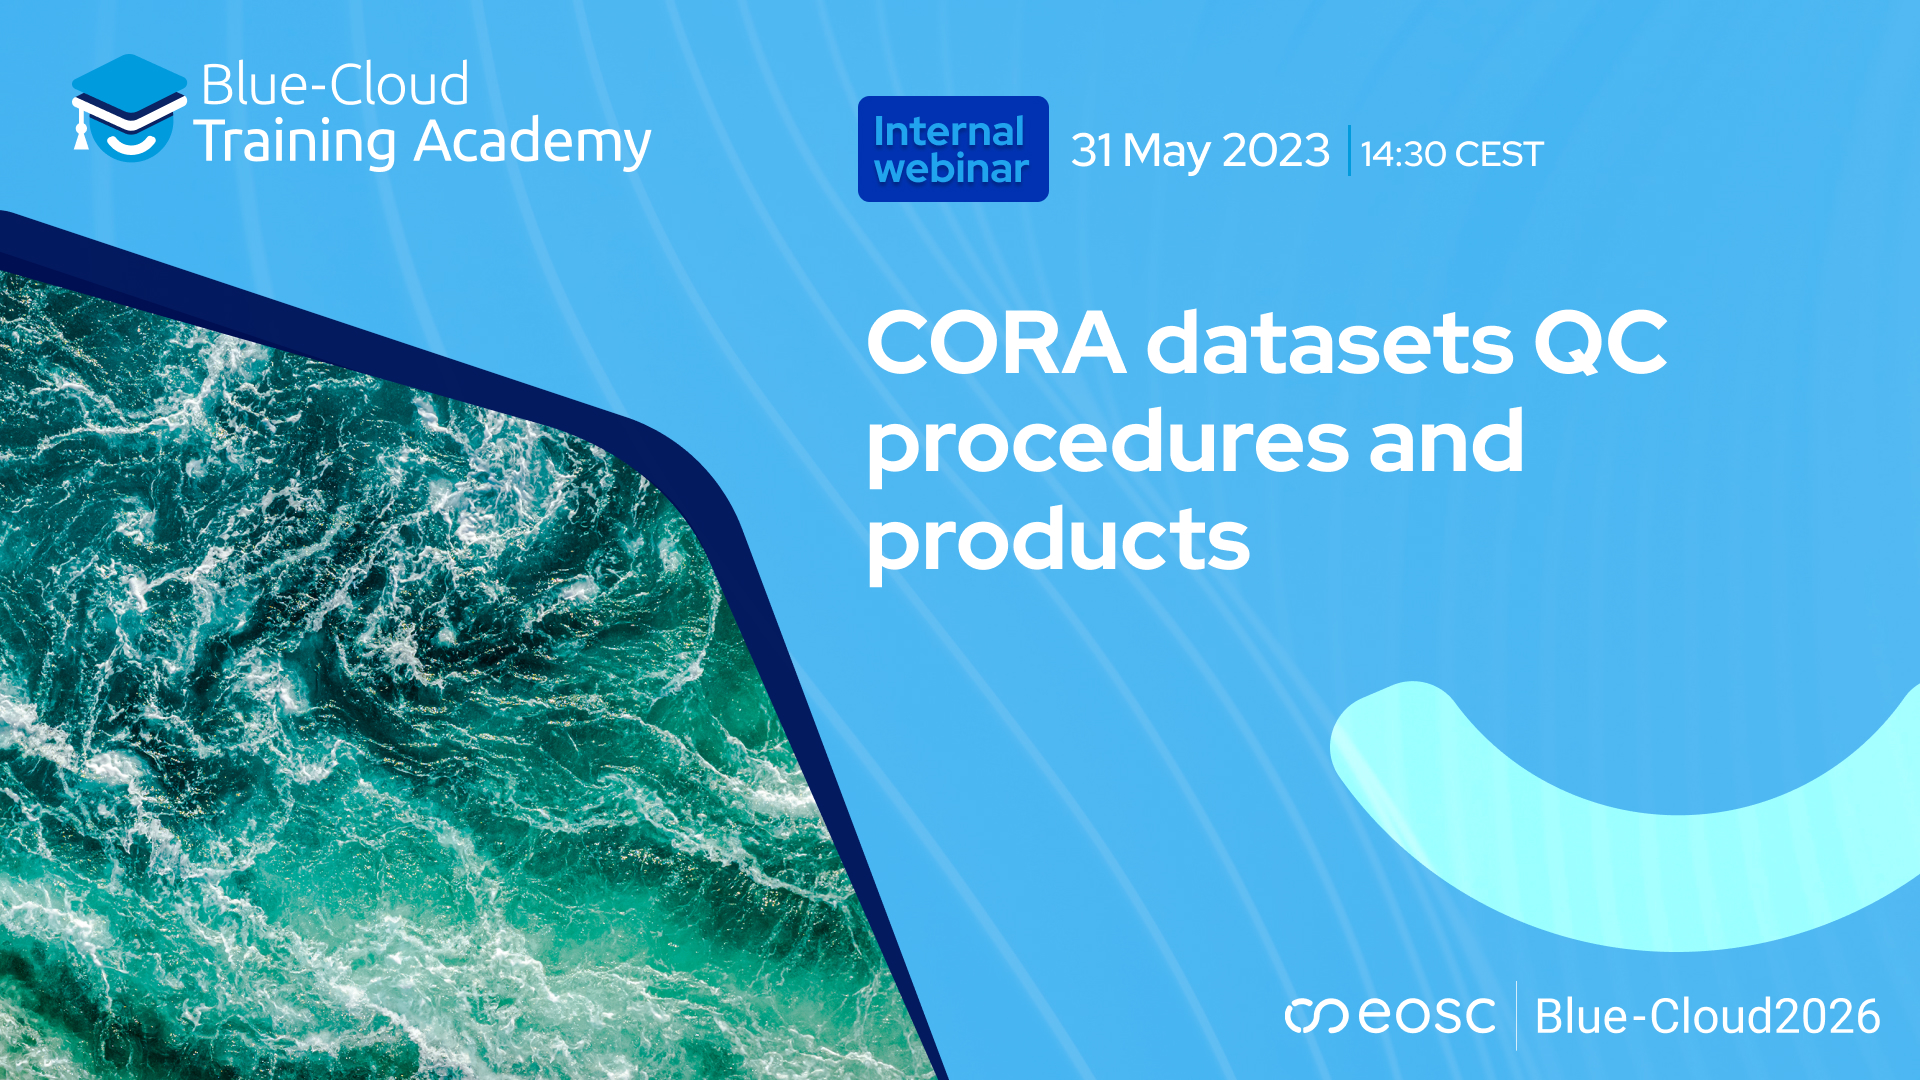 CORA datasets QC procedures and products